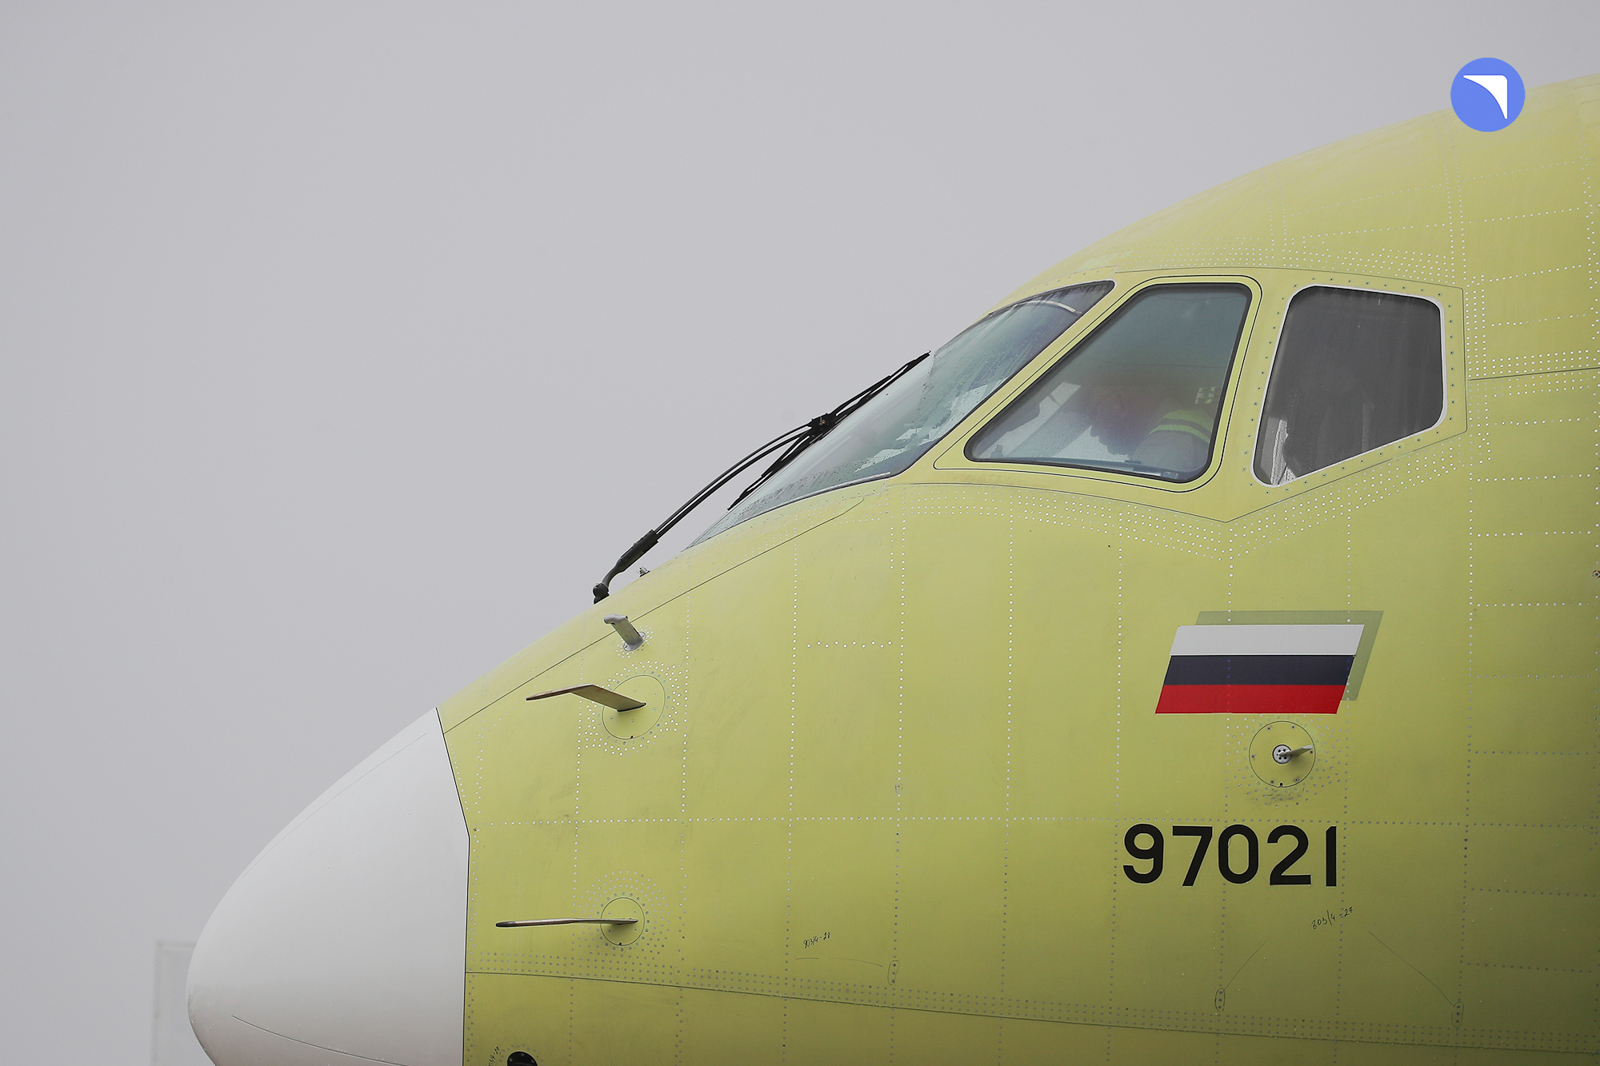 Rostec has Phased out the Imports of High-Strength Glazing for the Superjet